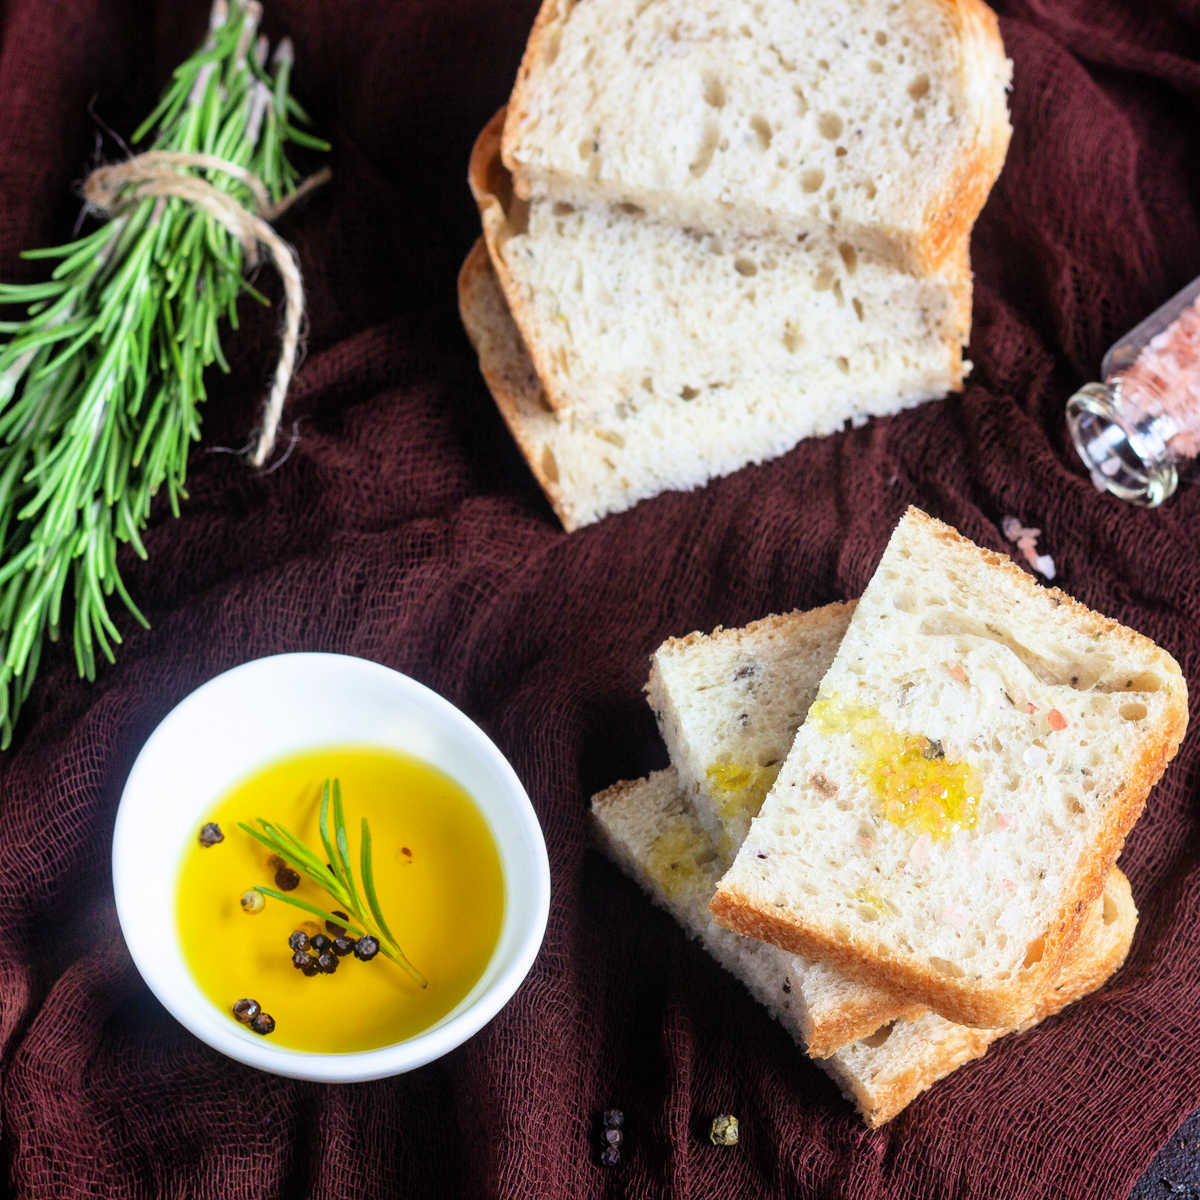 Slices of olive oil and rosemary bread along side a small bowl of olive oil and a  bundle of rosemary